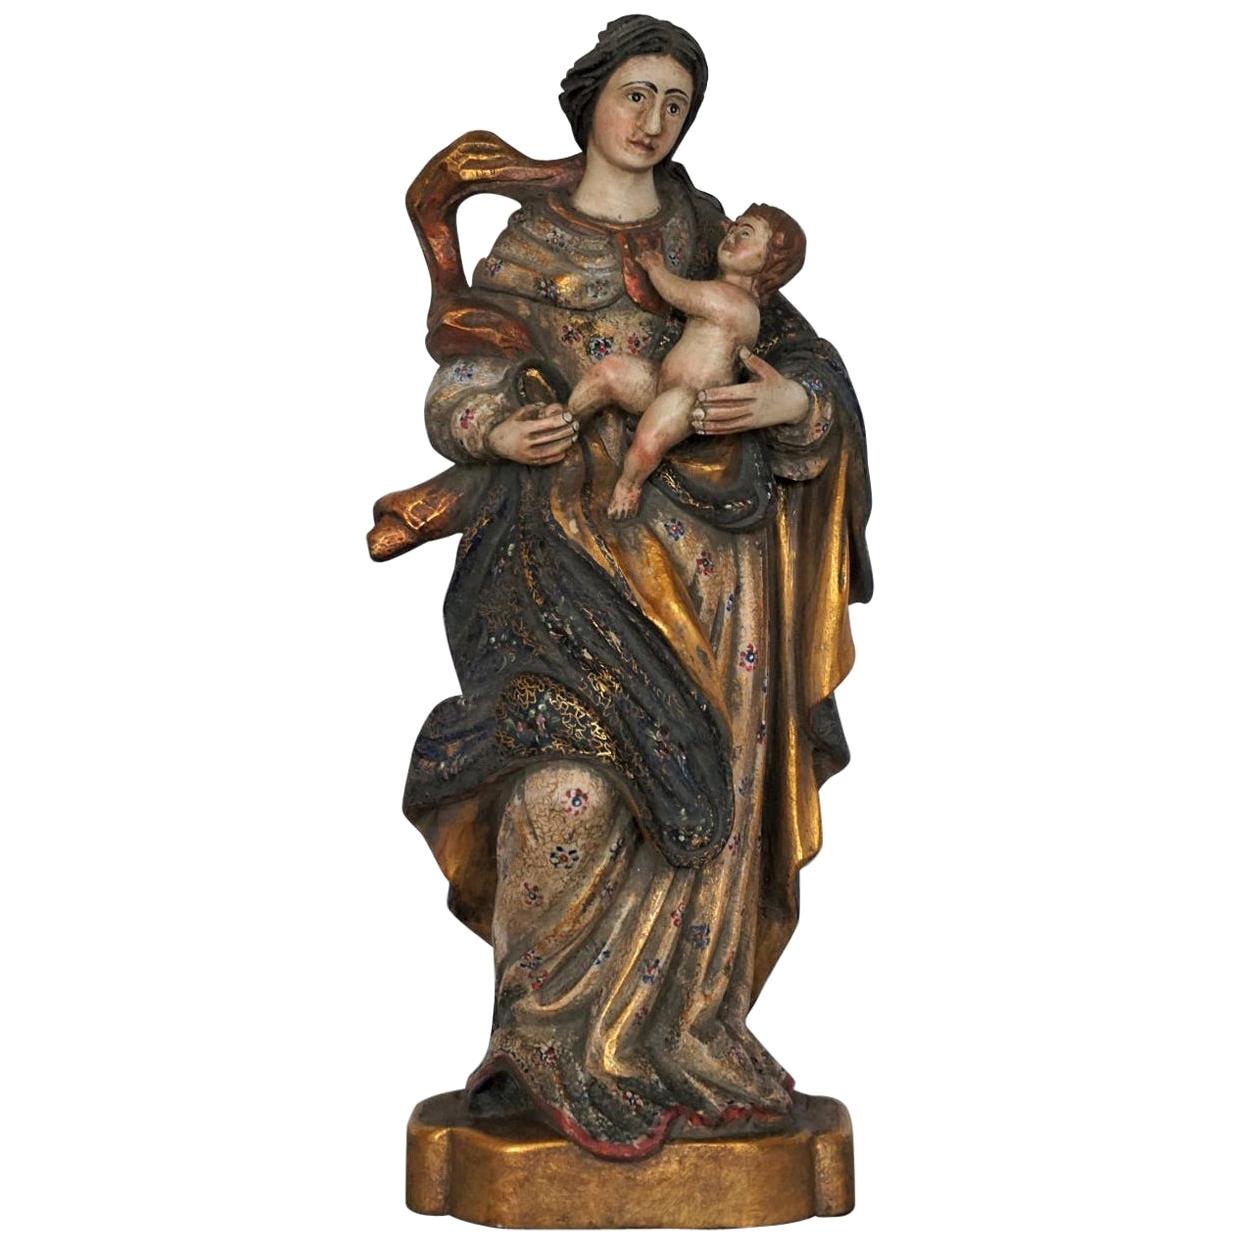 Madonna Carved Wood Sculpture Gold Leaf and Polychrome, Spain, Mid-18th Century